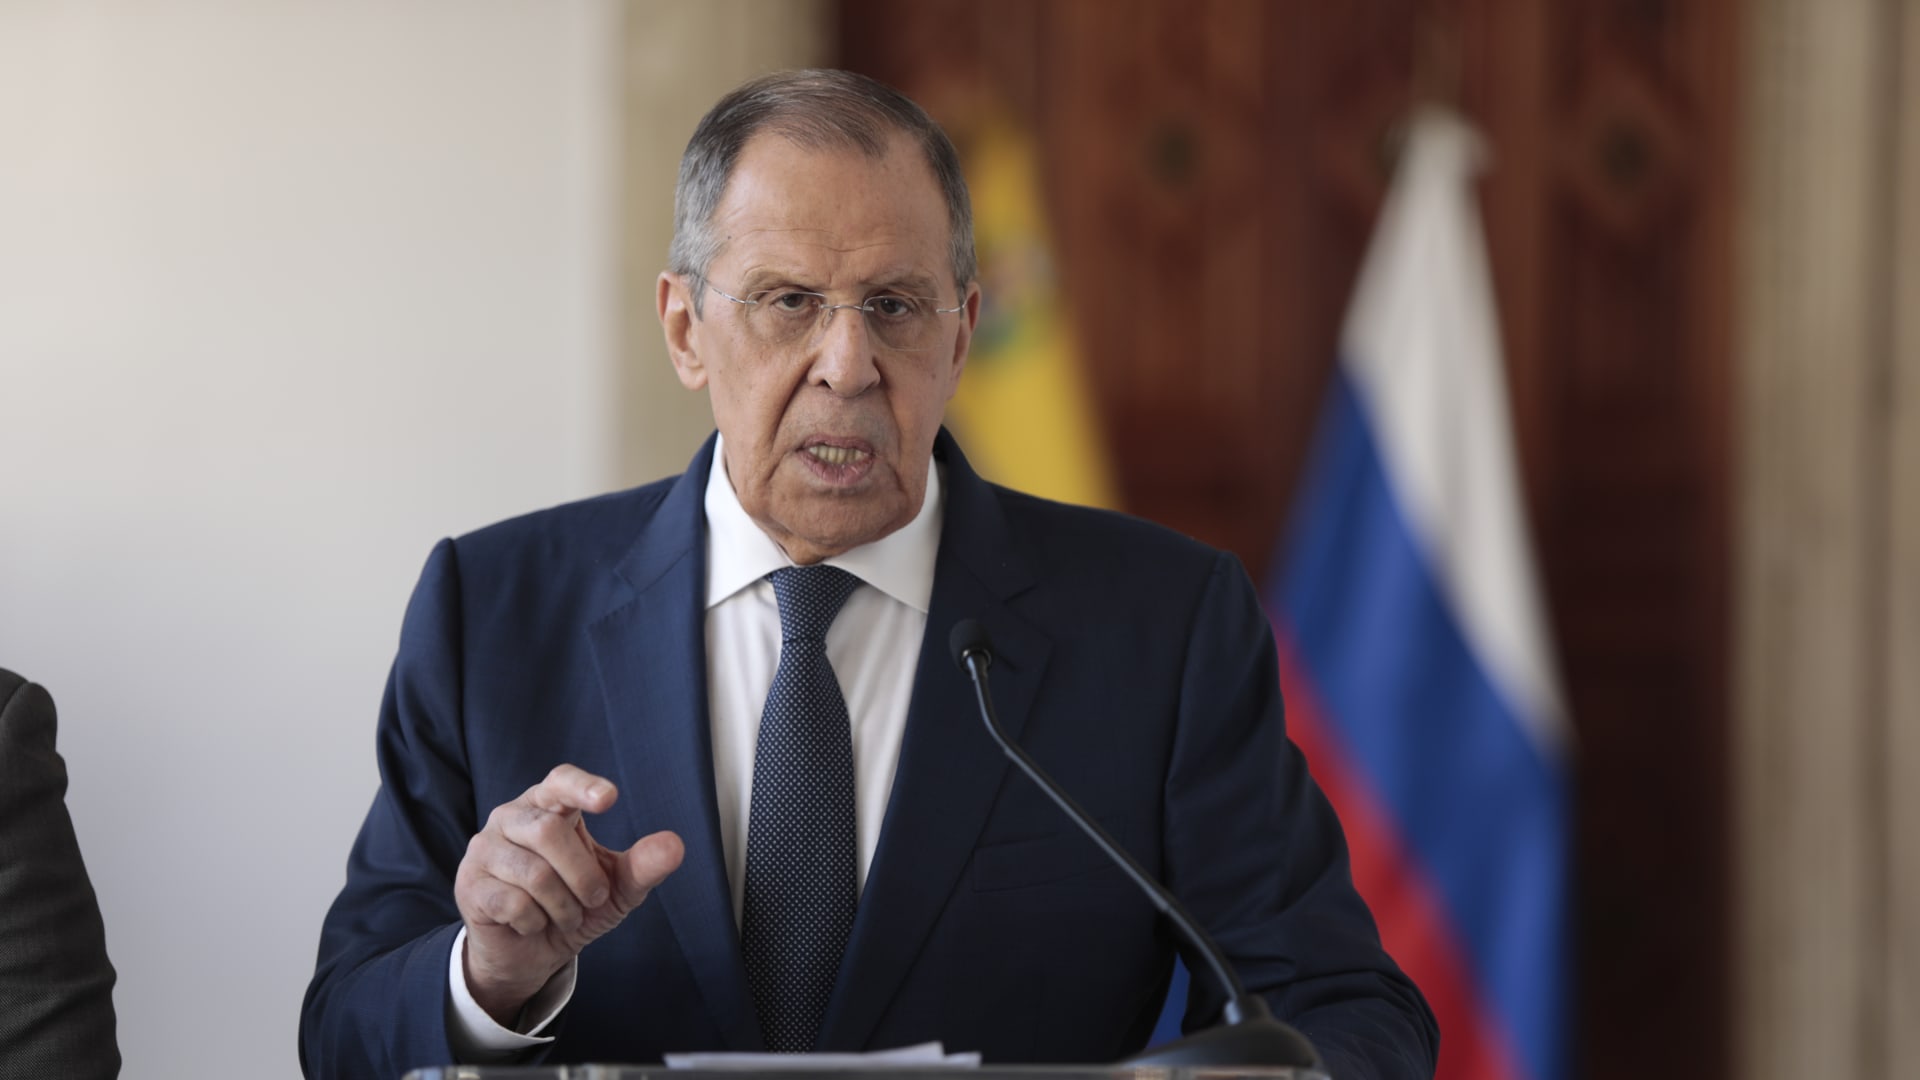 Russian Foreign Minister Sergei Lavrov's latest comments come as he carries out a tour of Latin American countries this week, a trip seen as a way for Russia to cement its alliances with countries in the region.